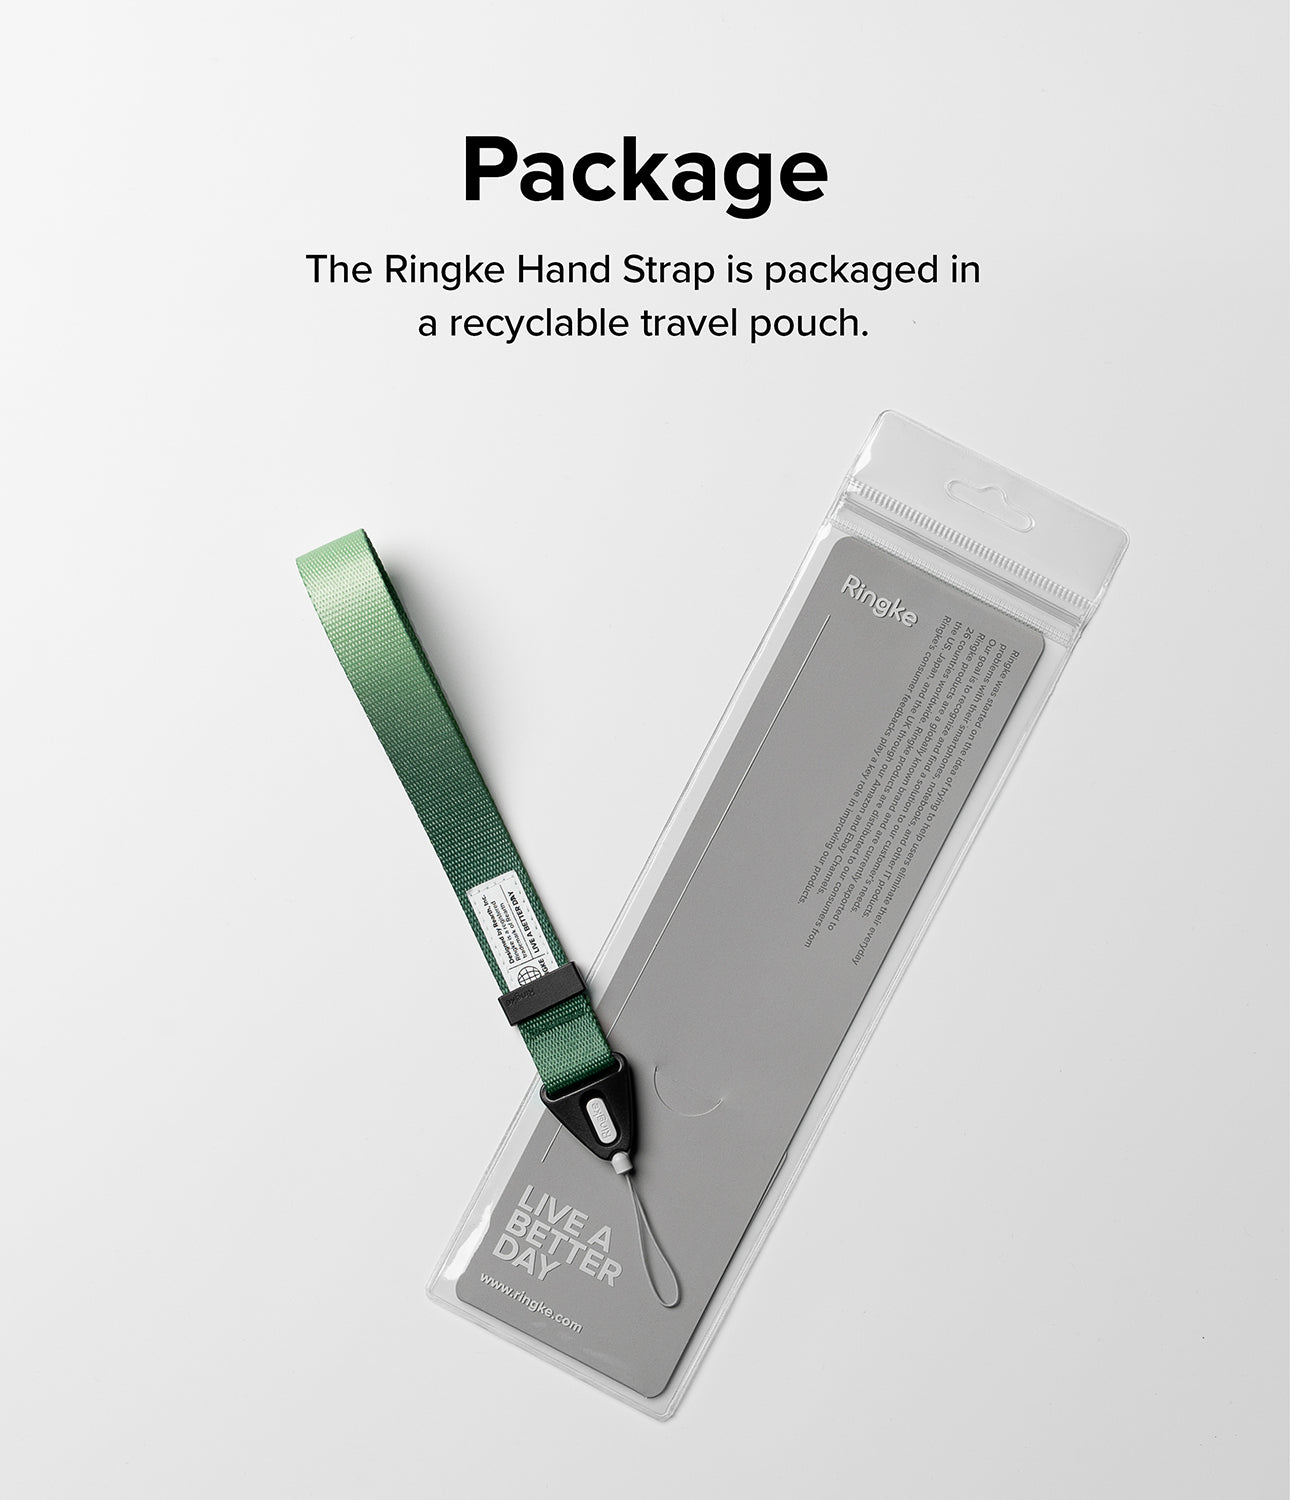 Hand Strap : Package with a recyclable travel pouch